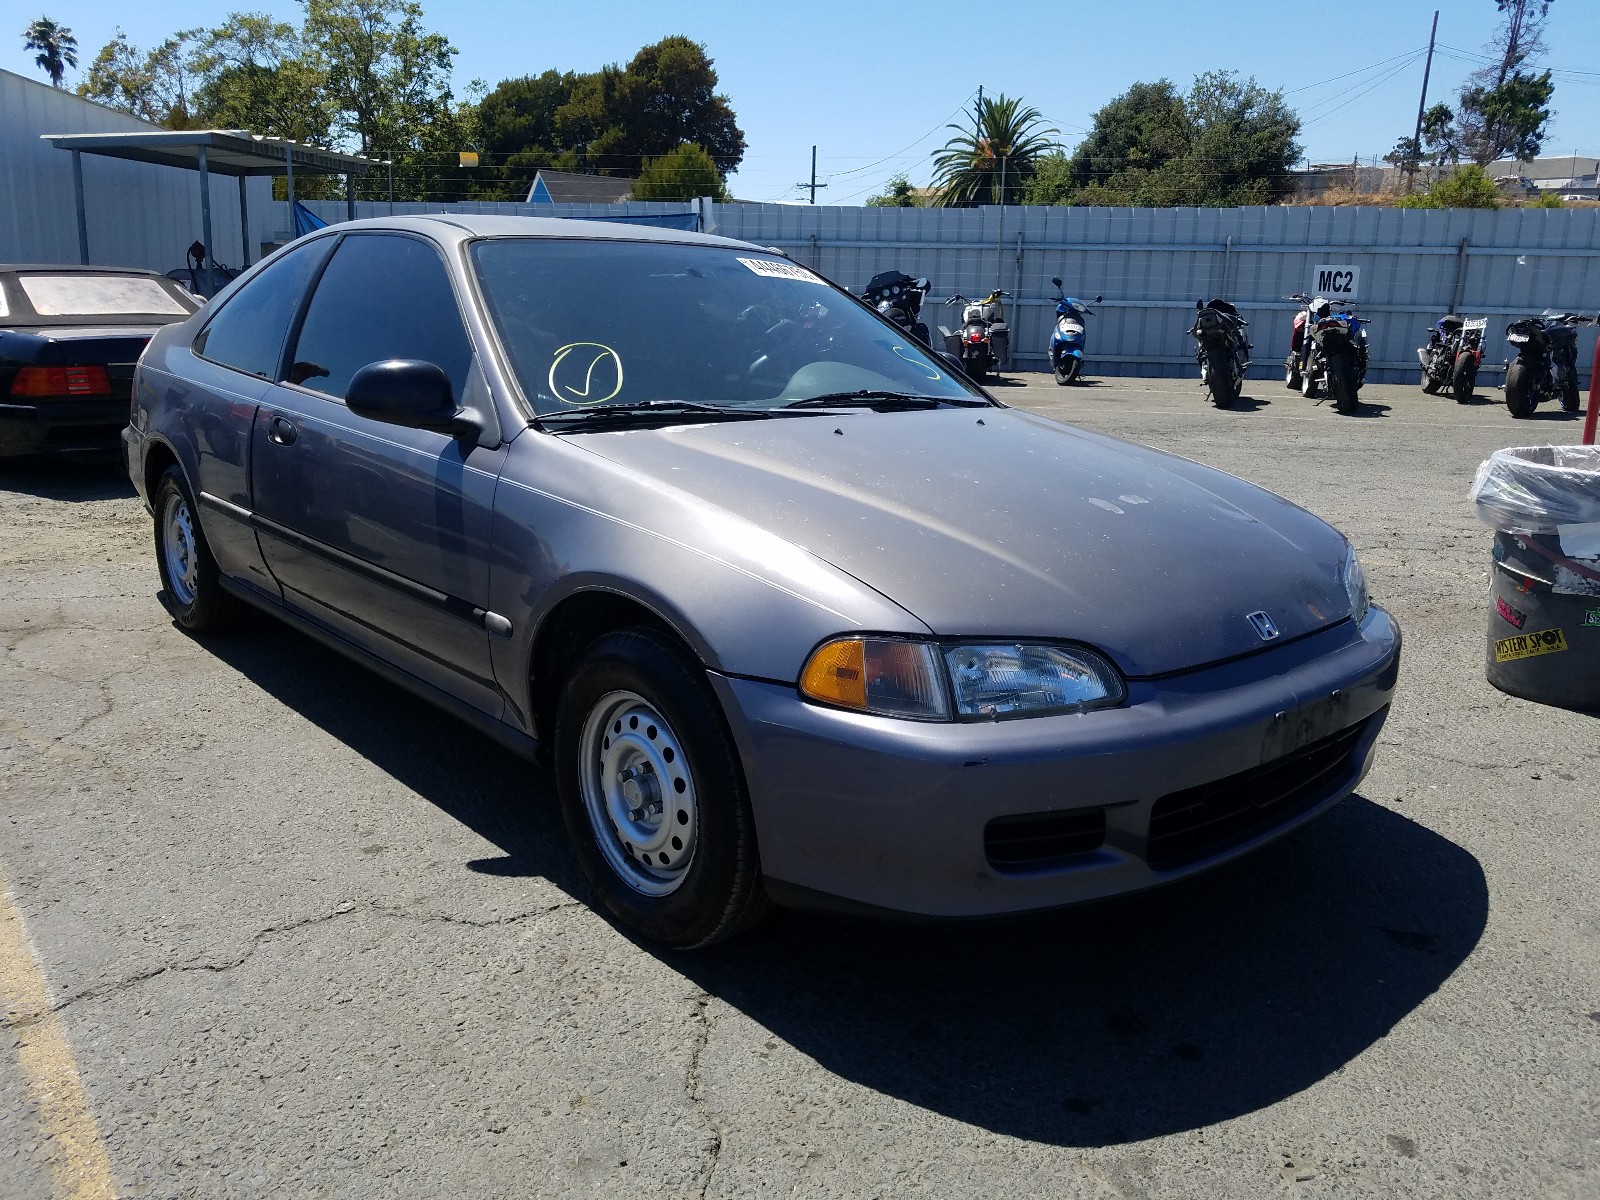 1995 honda civic dx for sale at copart vallejo ca lot 44466750 salvagereseller com 1995 honda civic dx for sale at copart